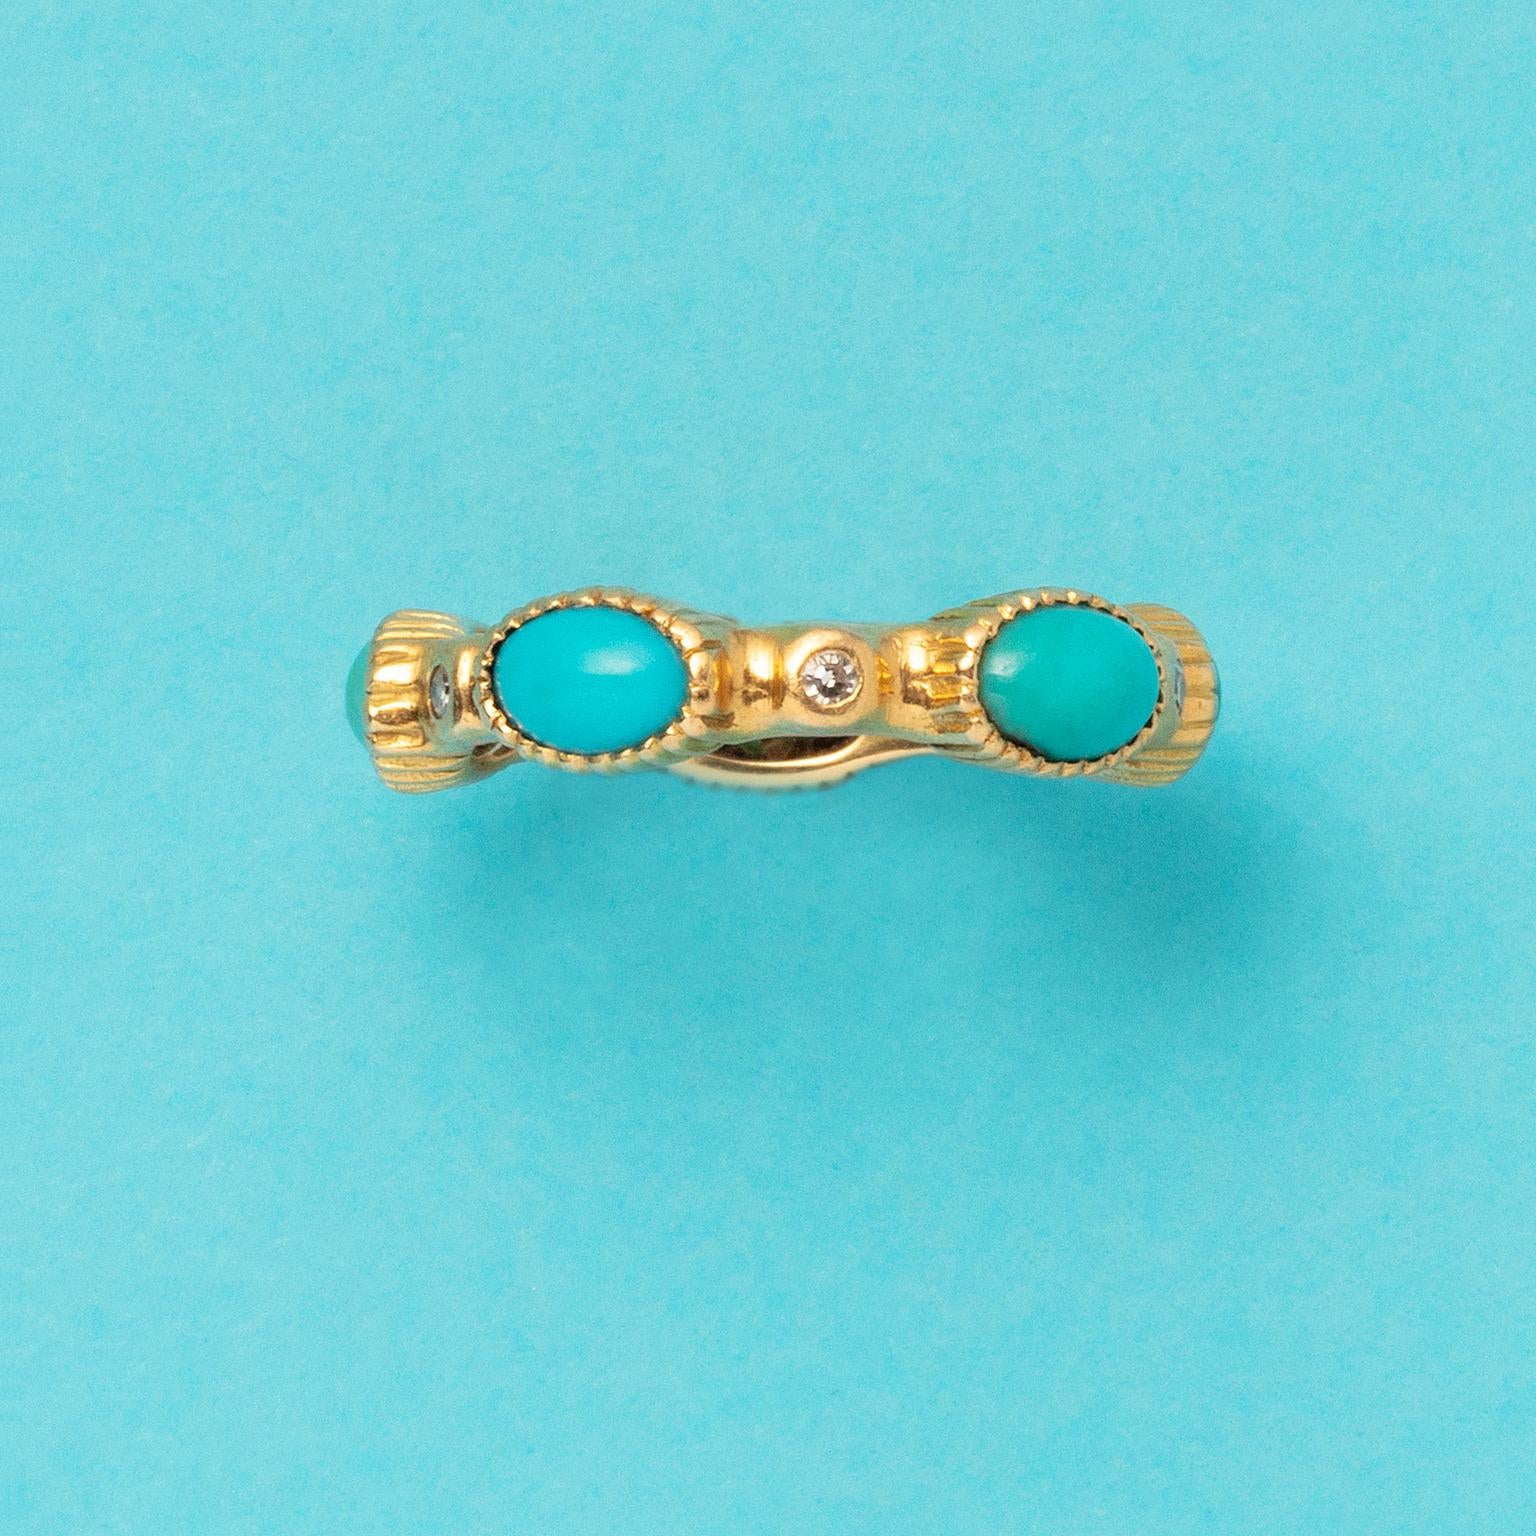 An 18 carat gold eternity pinky ring with oval cabochon cut turquoises set in large mille griffe setting alternated with brilliant cut diamonds, signed and numbered: Cartier, Paris, 32 499. 

weight: 3.02 gram
ring size: 15.5 mm. / 4.5 US